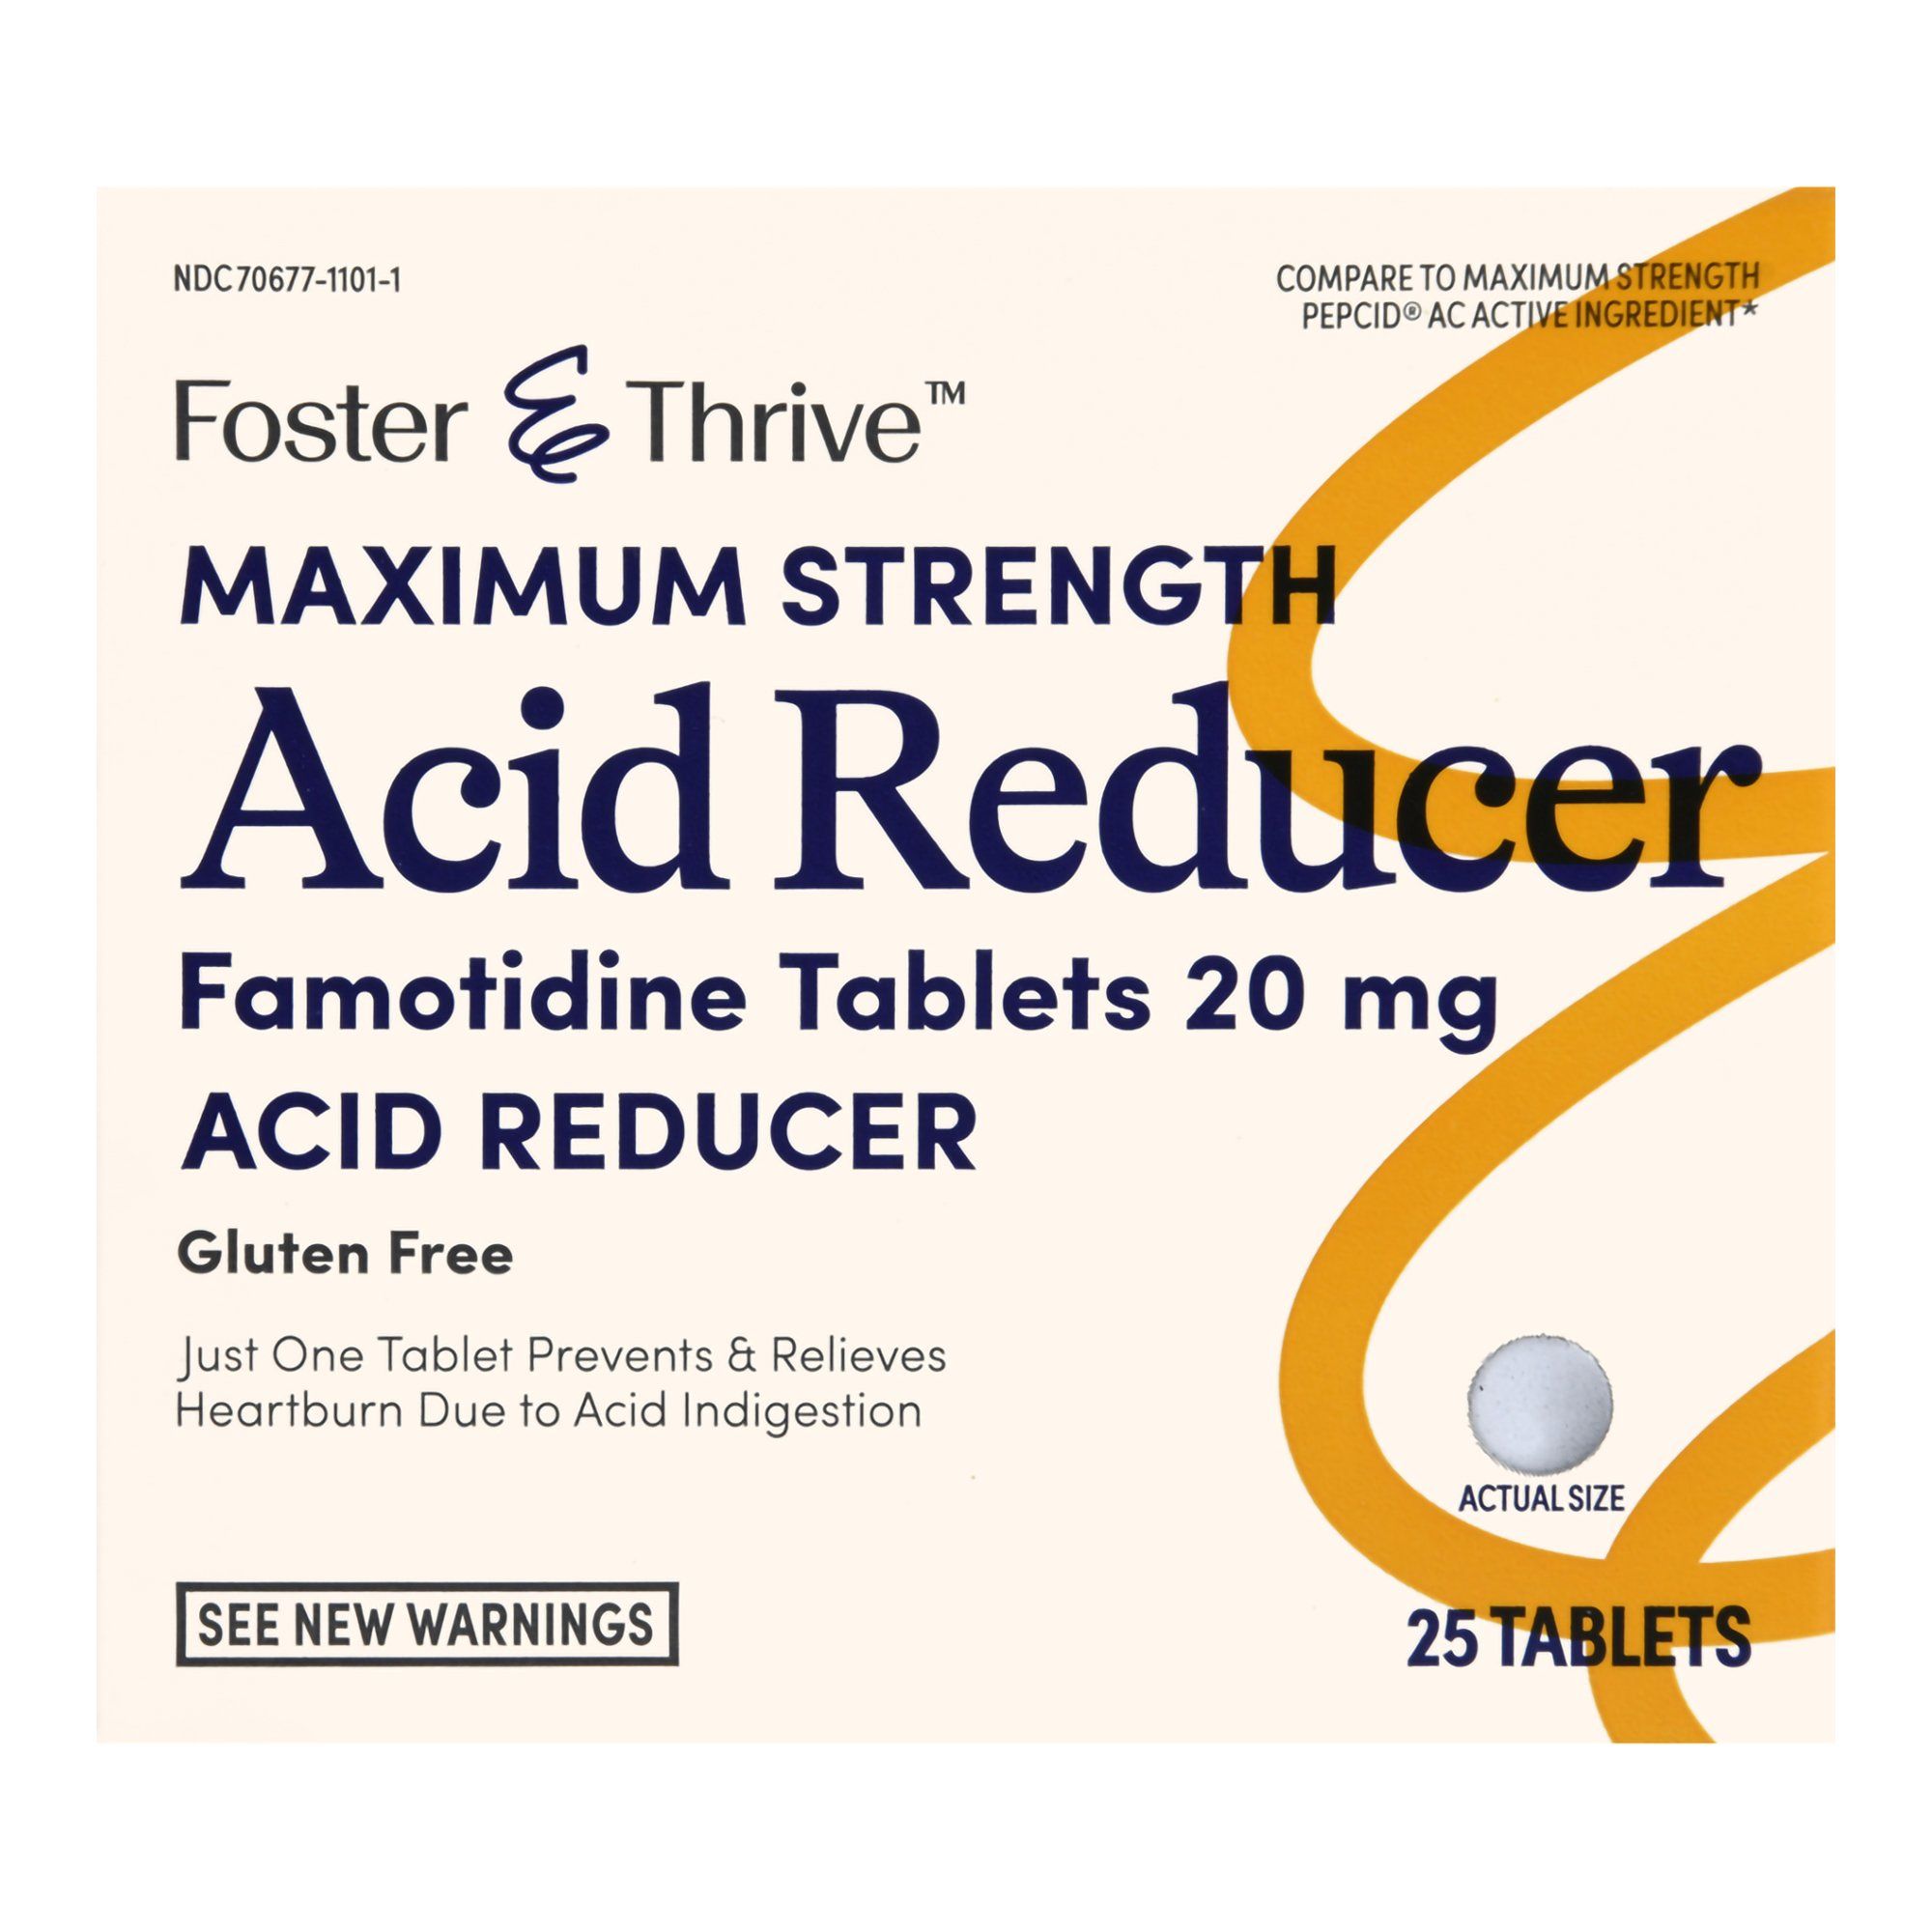 Foster & Thrive Maximum Strength Acid Reducer Famotidine Tablets, 20 mg - 25 ct